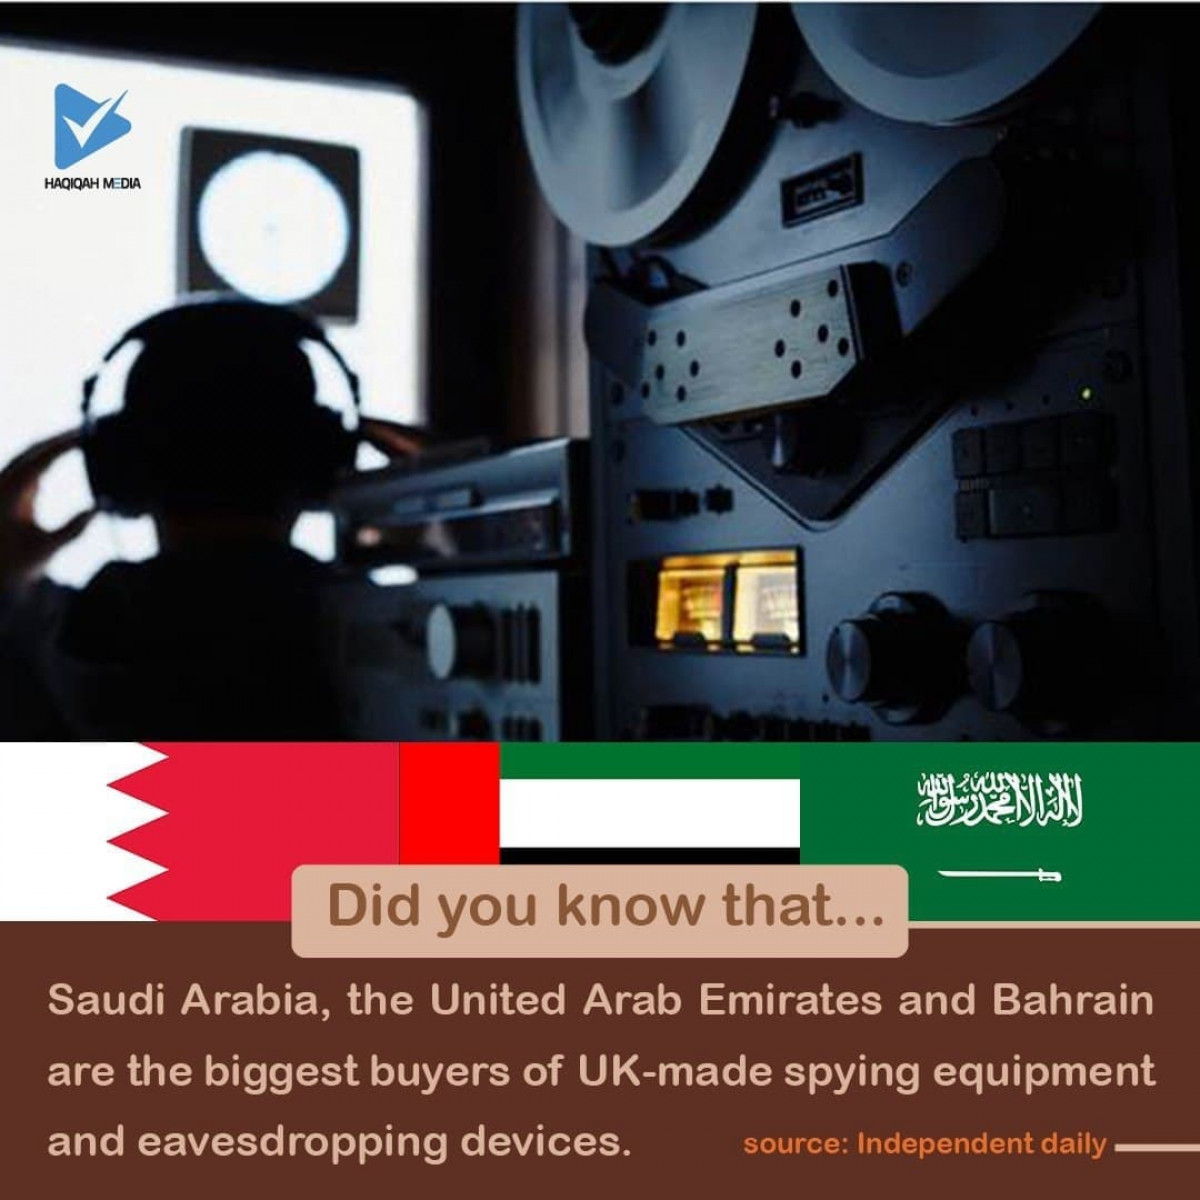 Saudi Arabia, the United Arab Emirates and Bahrain are the biggest buyers of UK-made spying equipment and eavesdropping devices